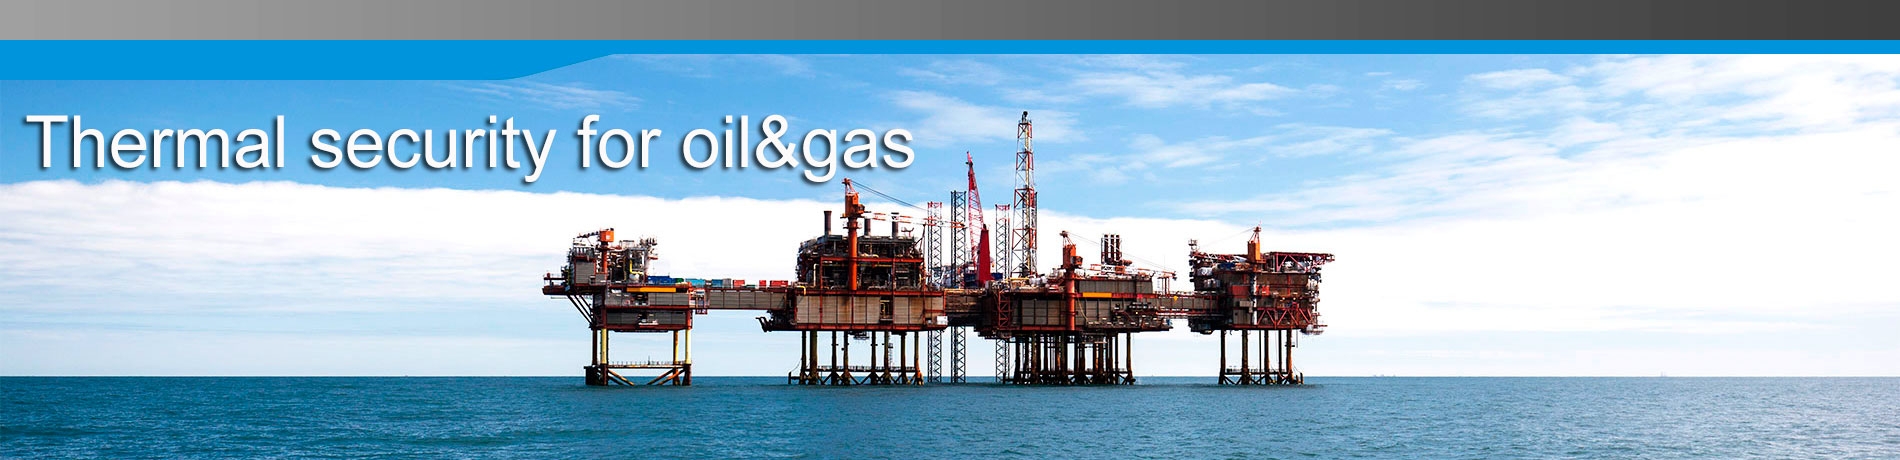 OIL&GAS SOLUTIONS